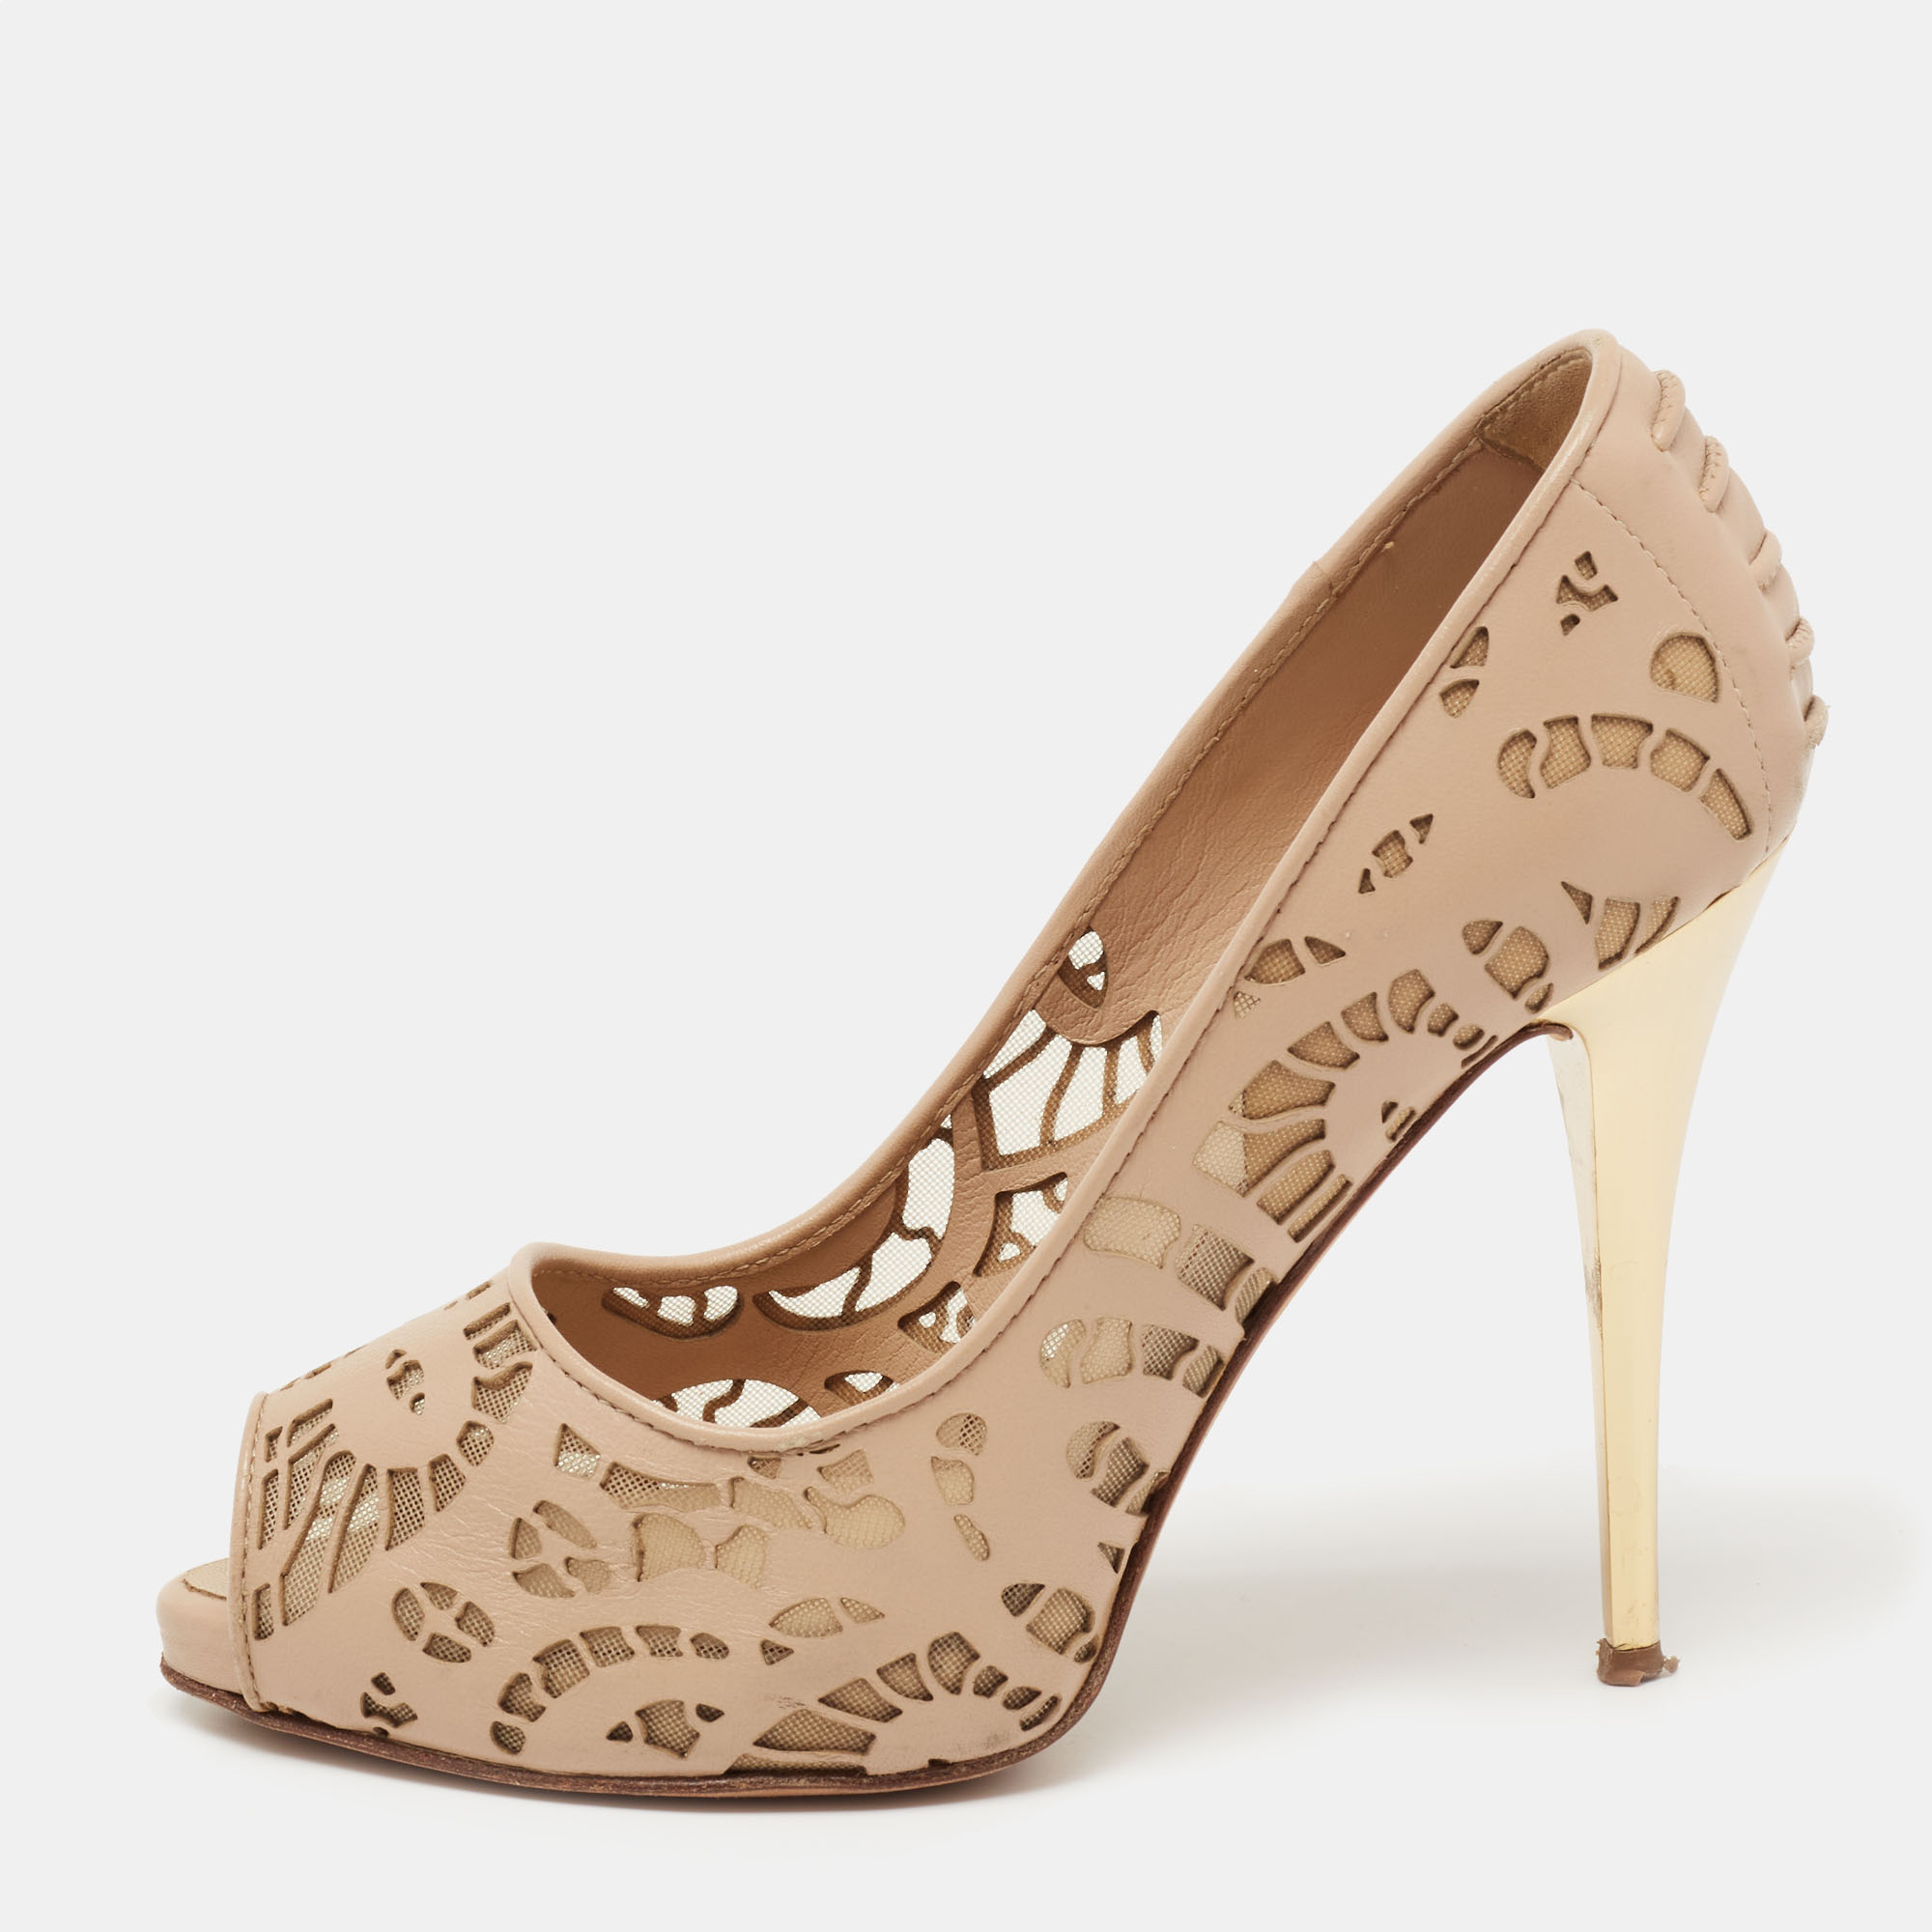 This pair of pumps from Giuseppe Zanotti is a combination of sophistication and comfort. The Sharon shoes have been exquisitely crafted from leather and net and feature intricate detailing peep toe silhouette and gold tone hardware. Lifted on 10cm heels it can elevate any outfit.